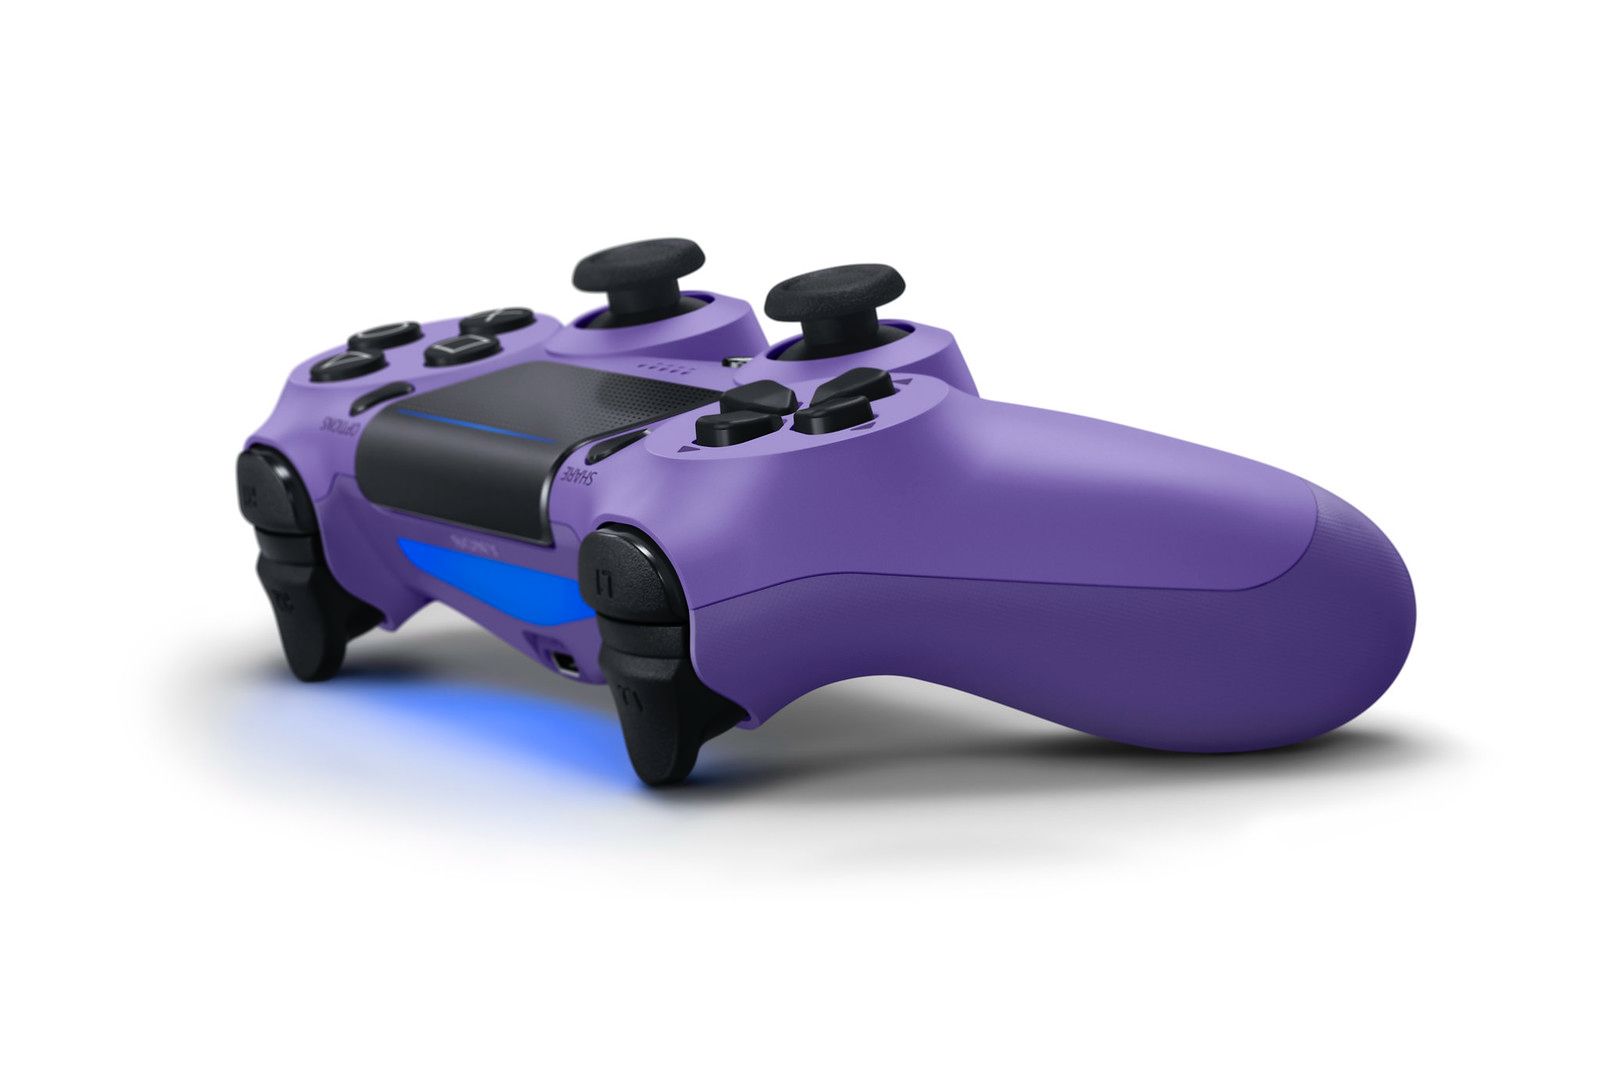 Control PS4 Play Station 4 Dualshock 4 Electric Purple Generic